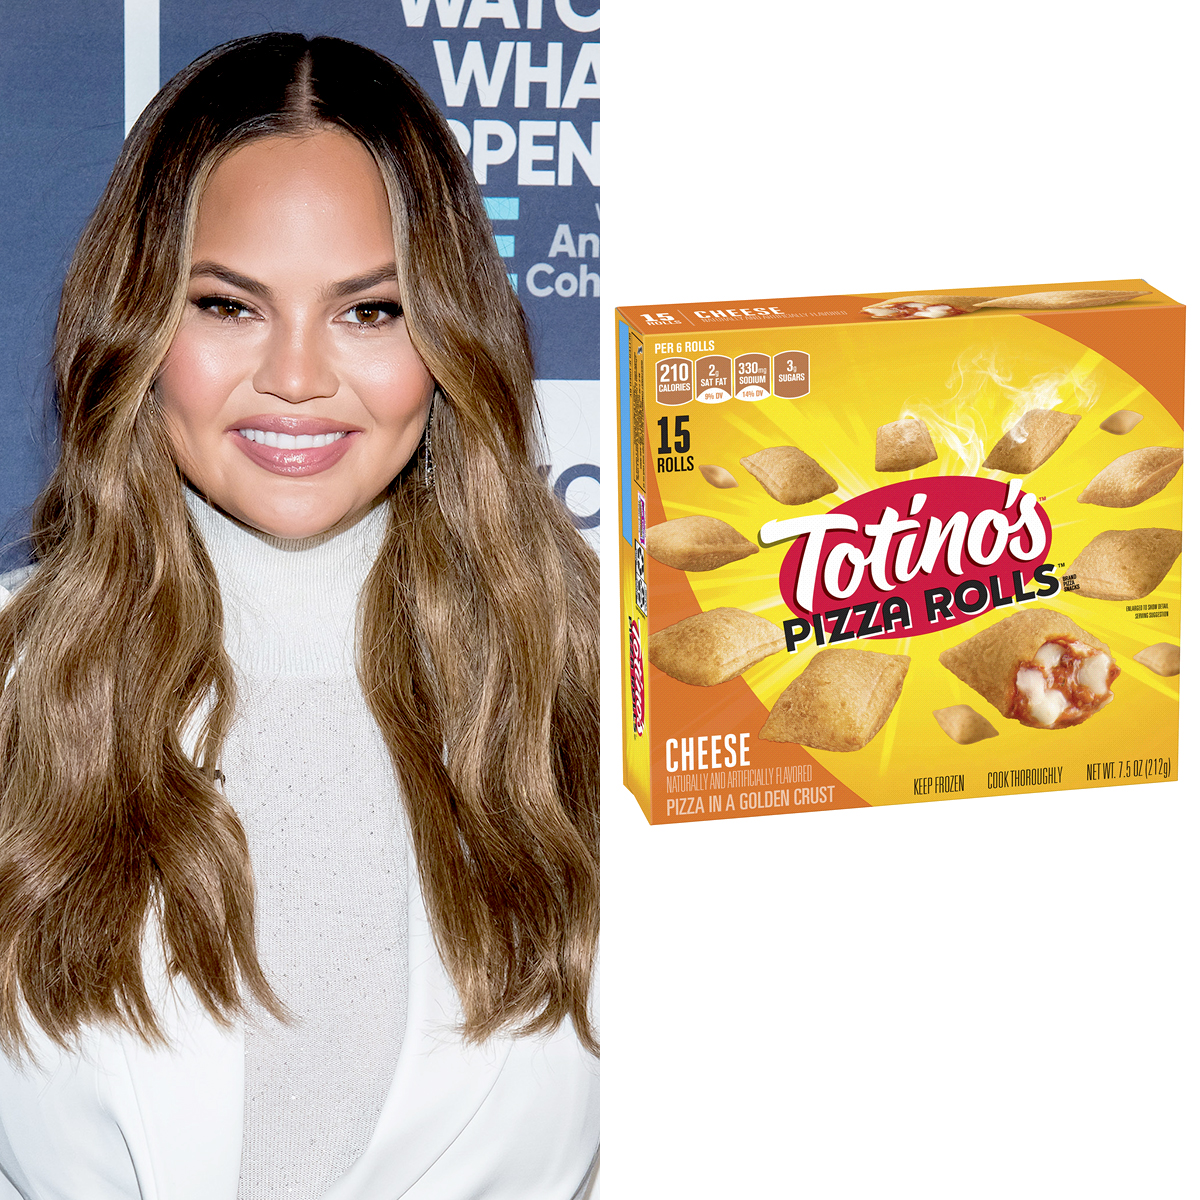 Chrissy-Teigen-and-Totino's-Pizza